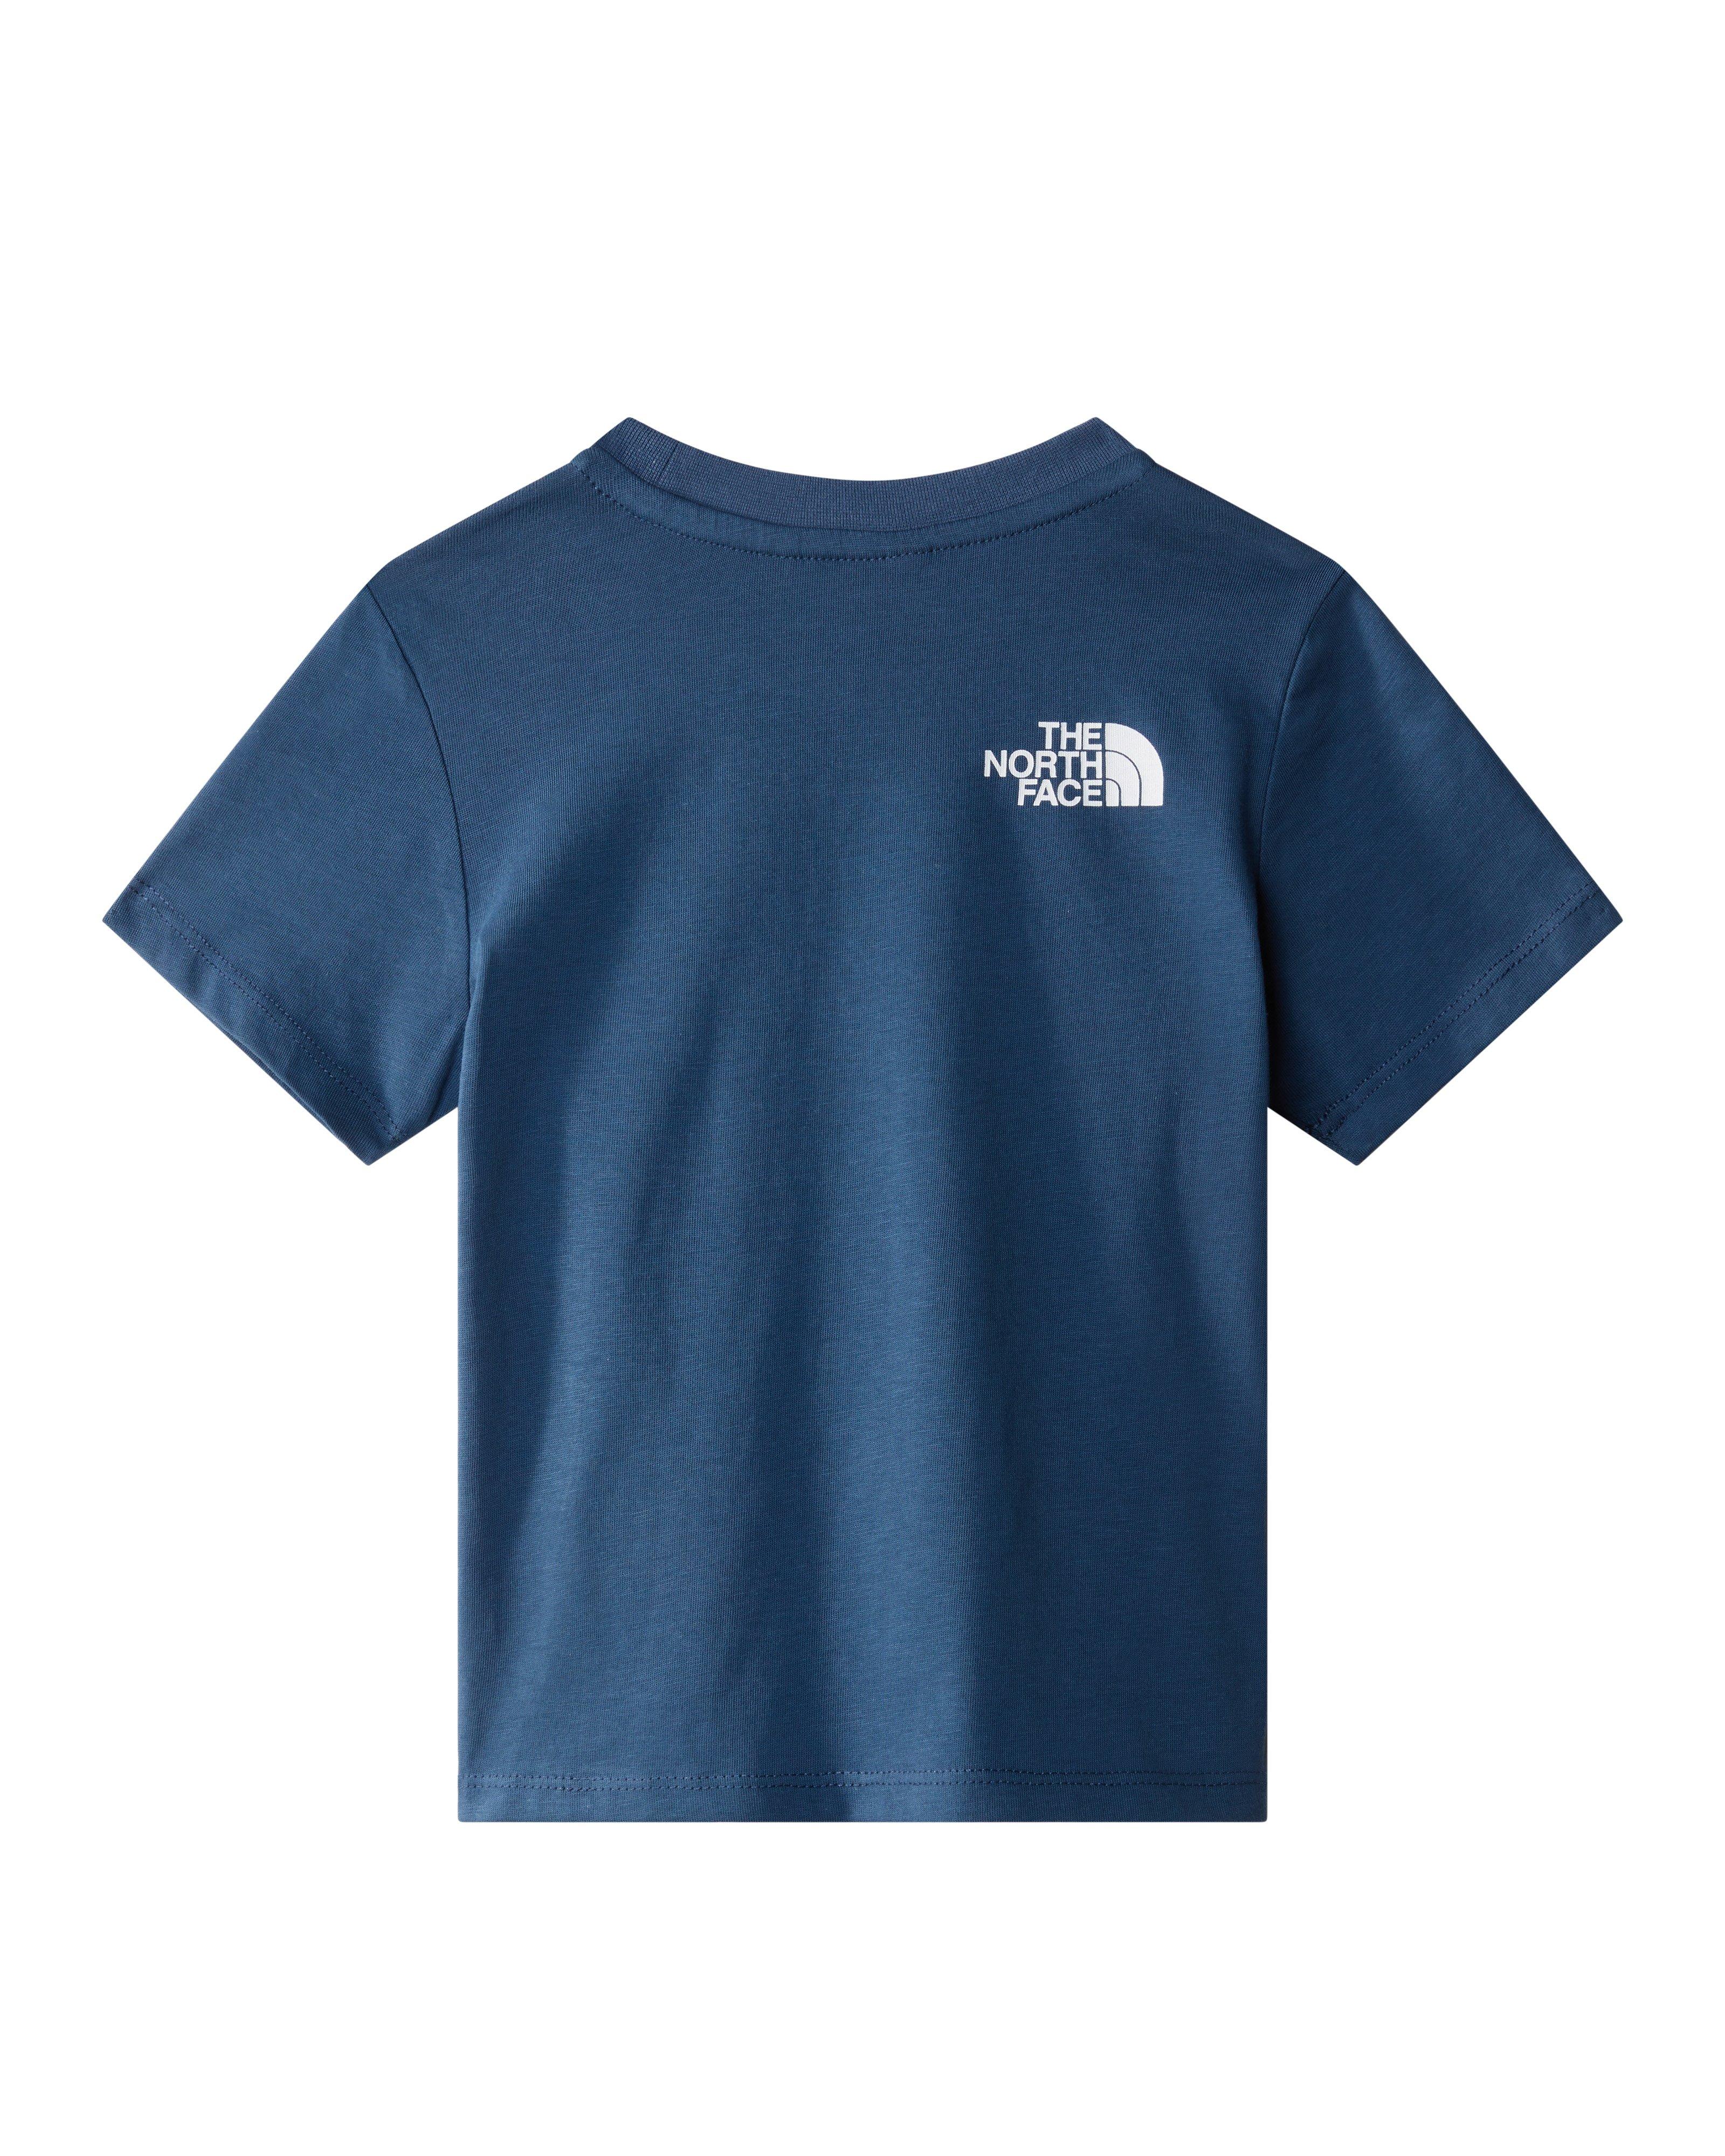 The North Face Kids Lifestyle Graphic T-shirt -  Mid Blue